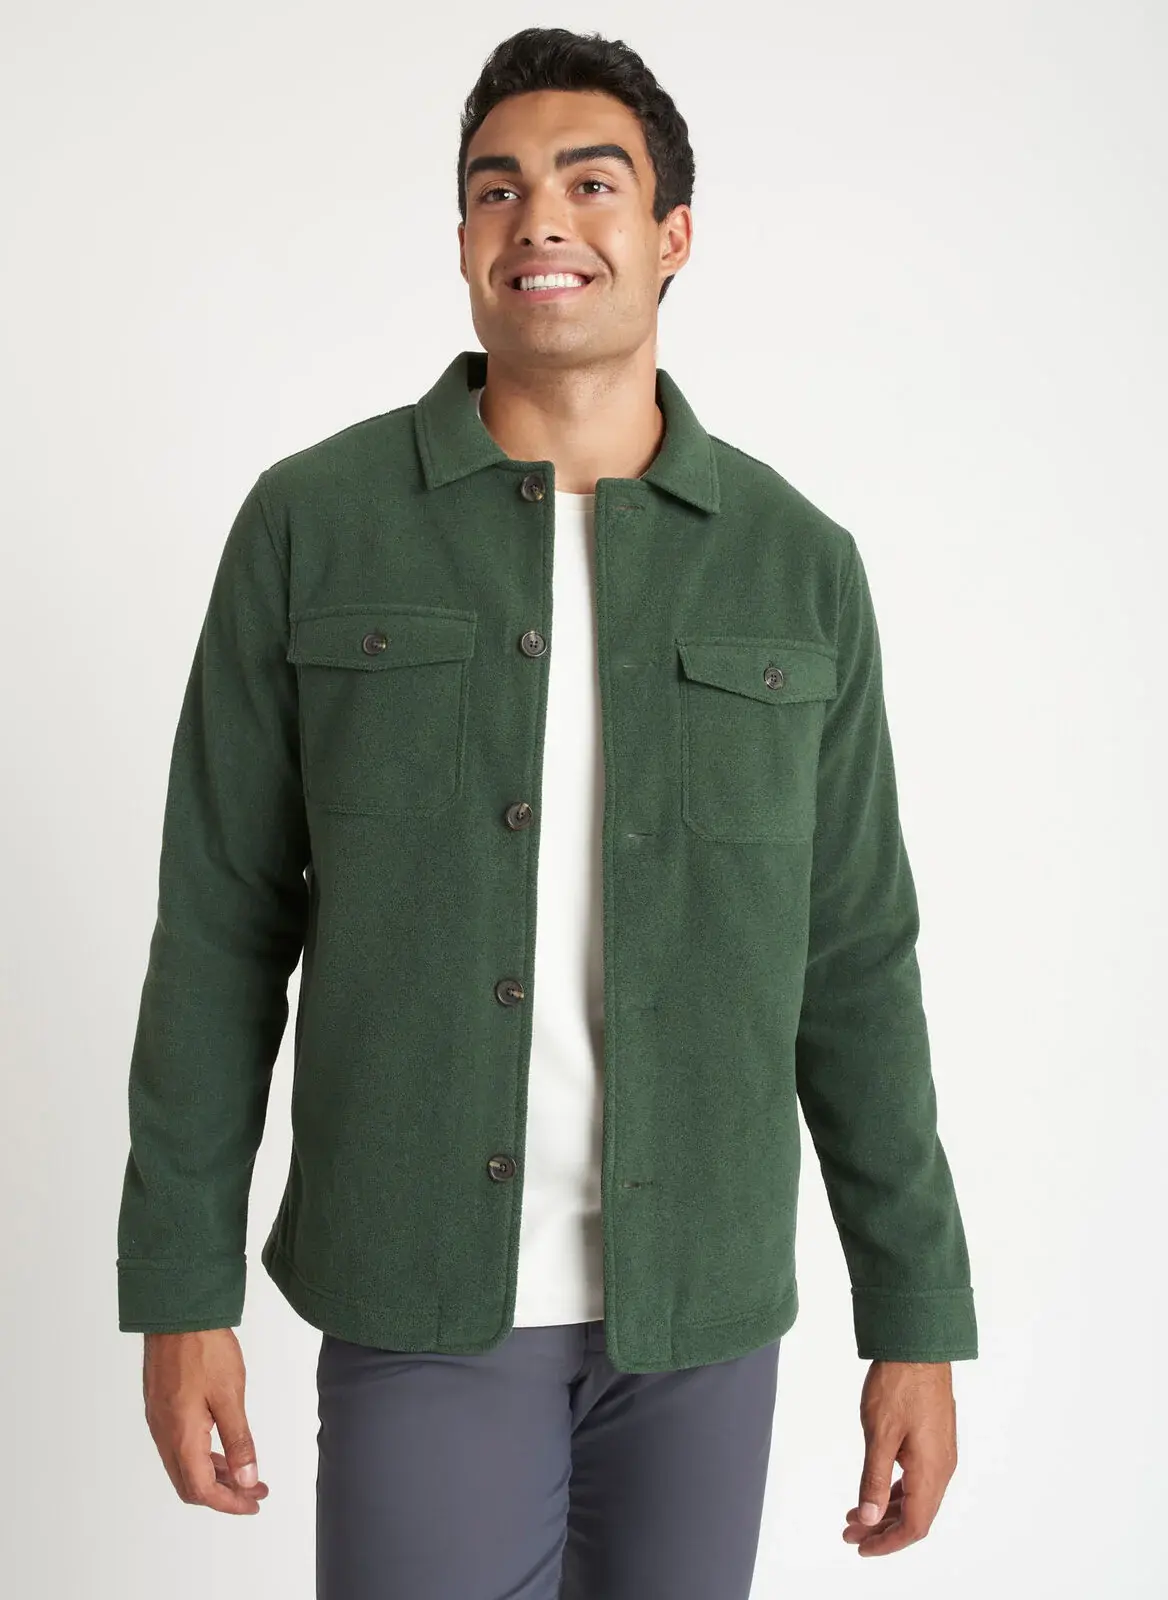 Kit And Ace Water Resistant Fleece Shirt Jacket. 1